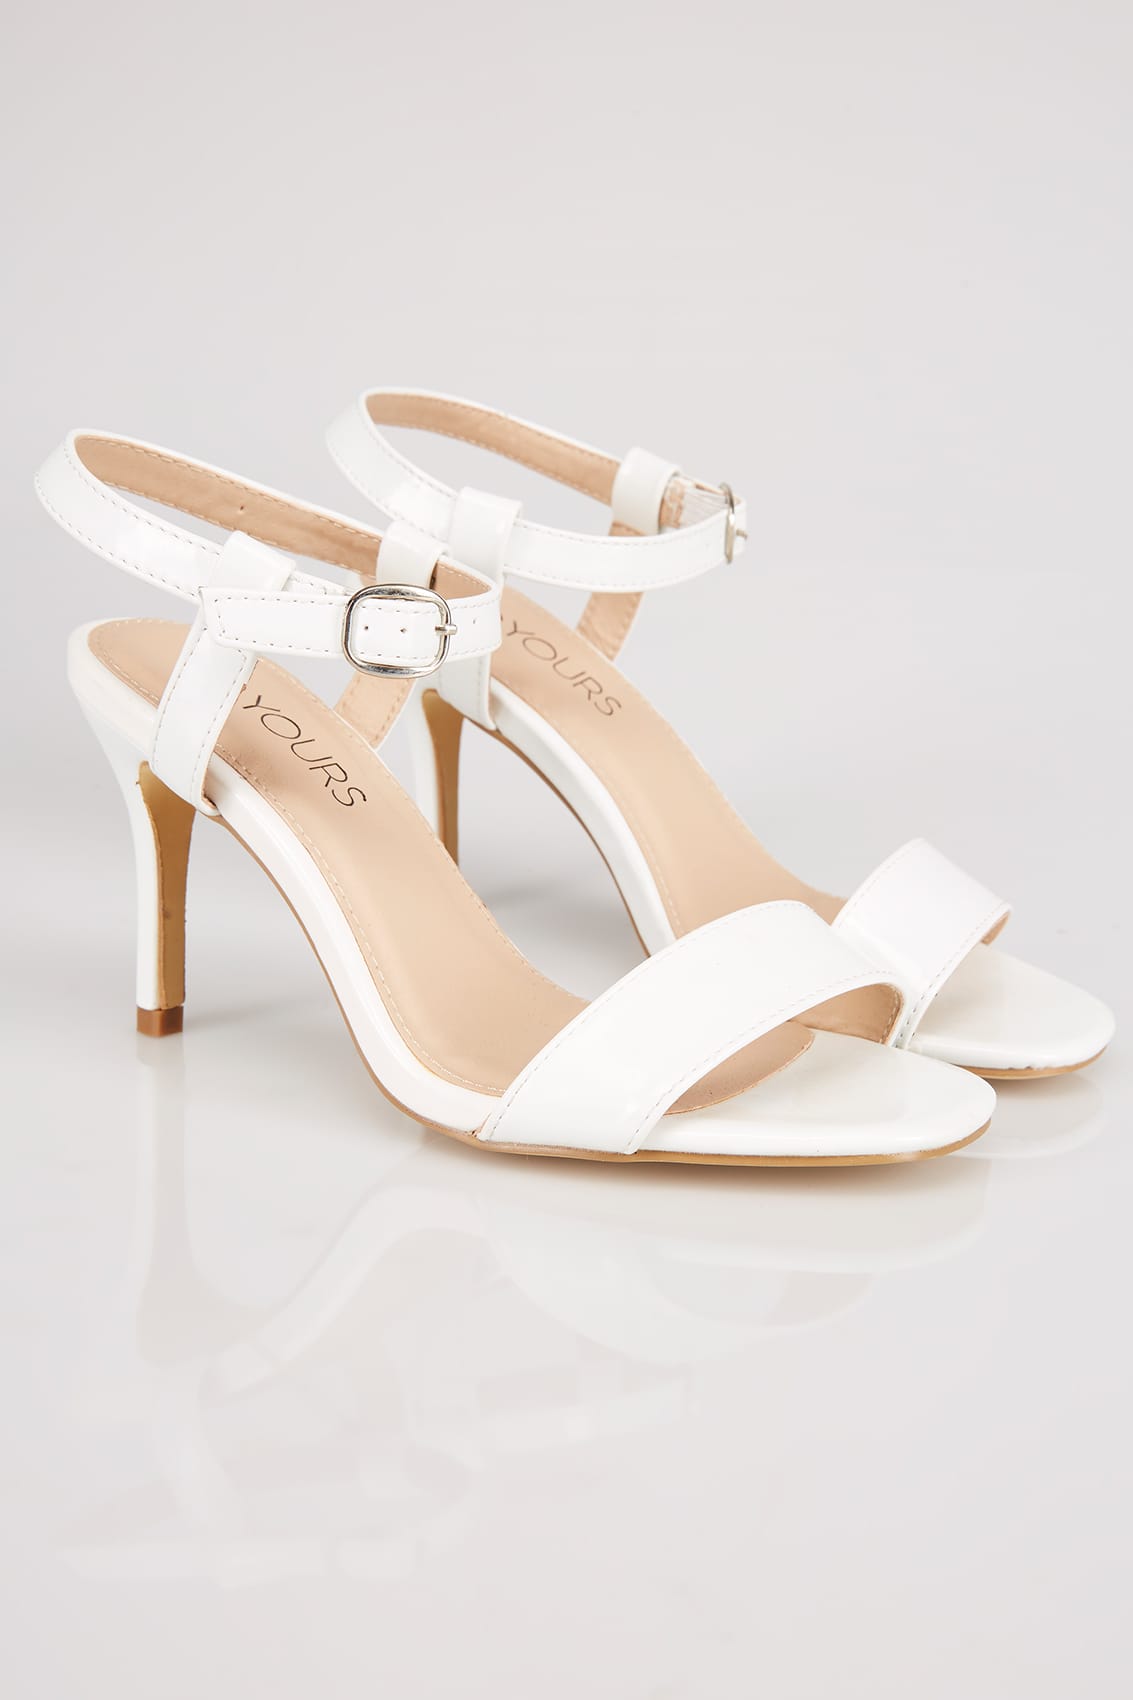 White Patent Square Toe Heeled Sandals With Ankle Strap In EEE Fit 4EEE ...